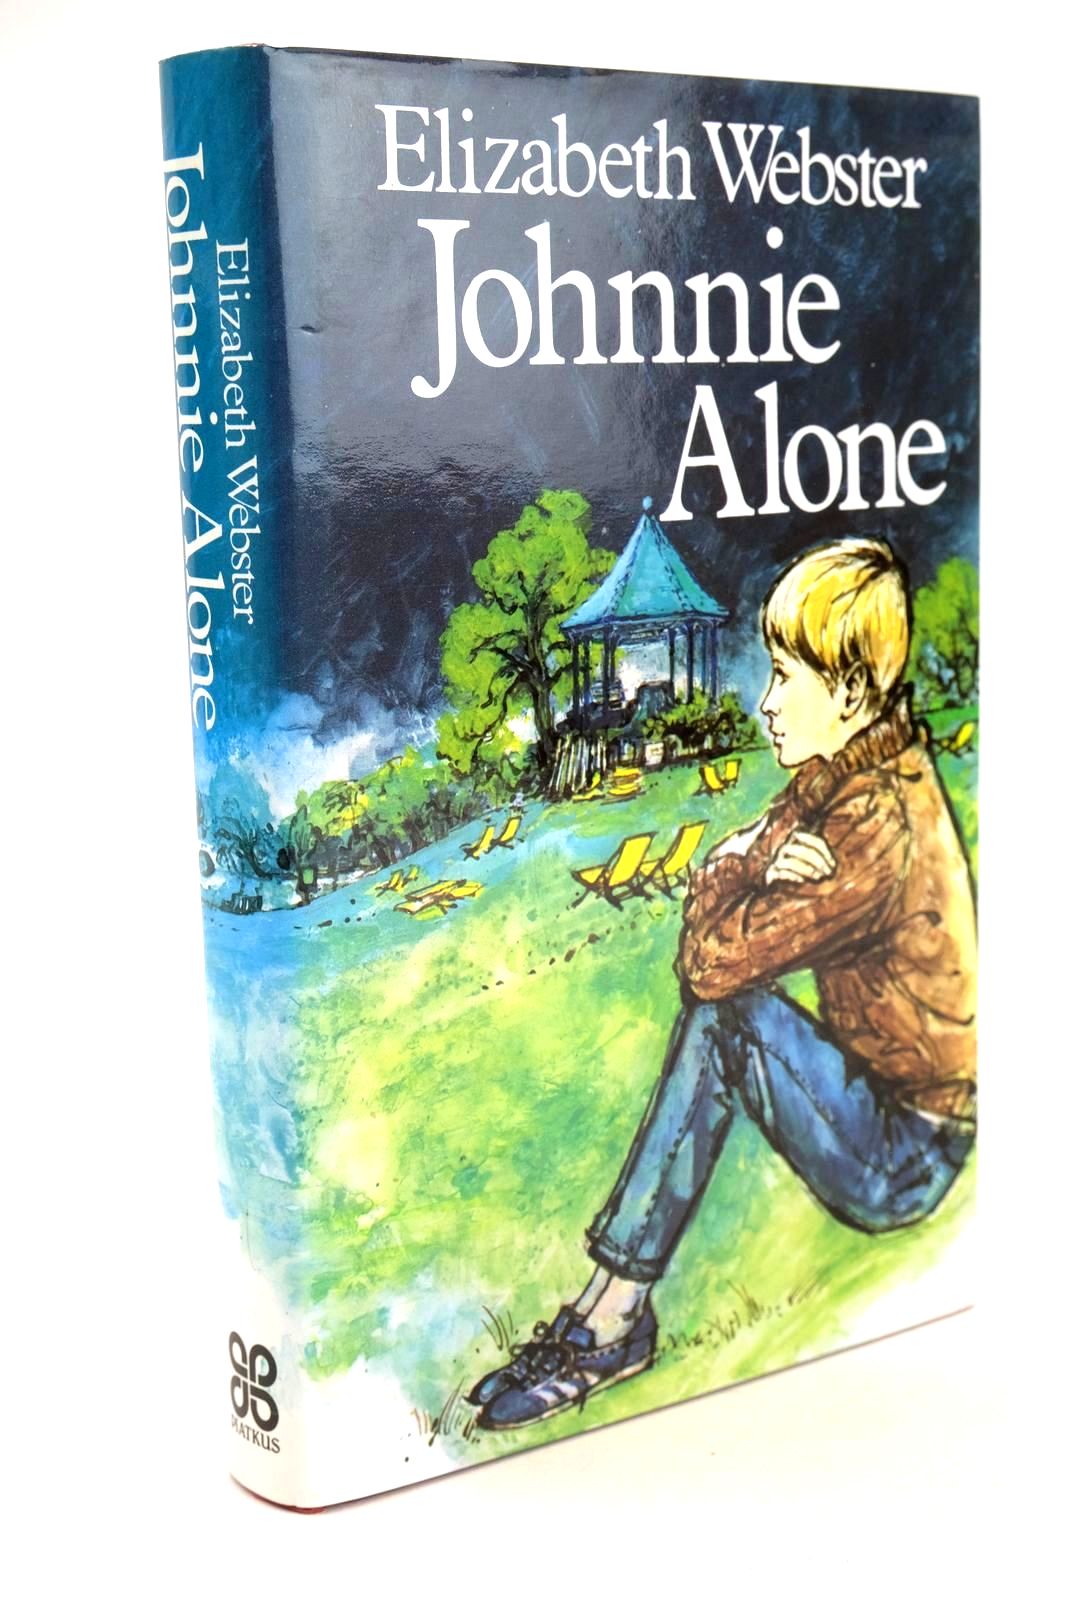 Photo of JOHNNIE ALONE written by Webster, Elizabeth published by Piatkus (STOCK CODE: 1326455)  for sale by Stella & Rose's Books